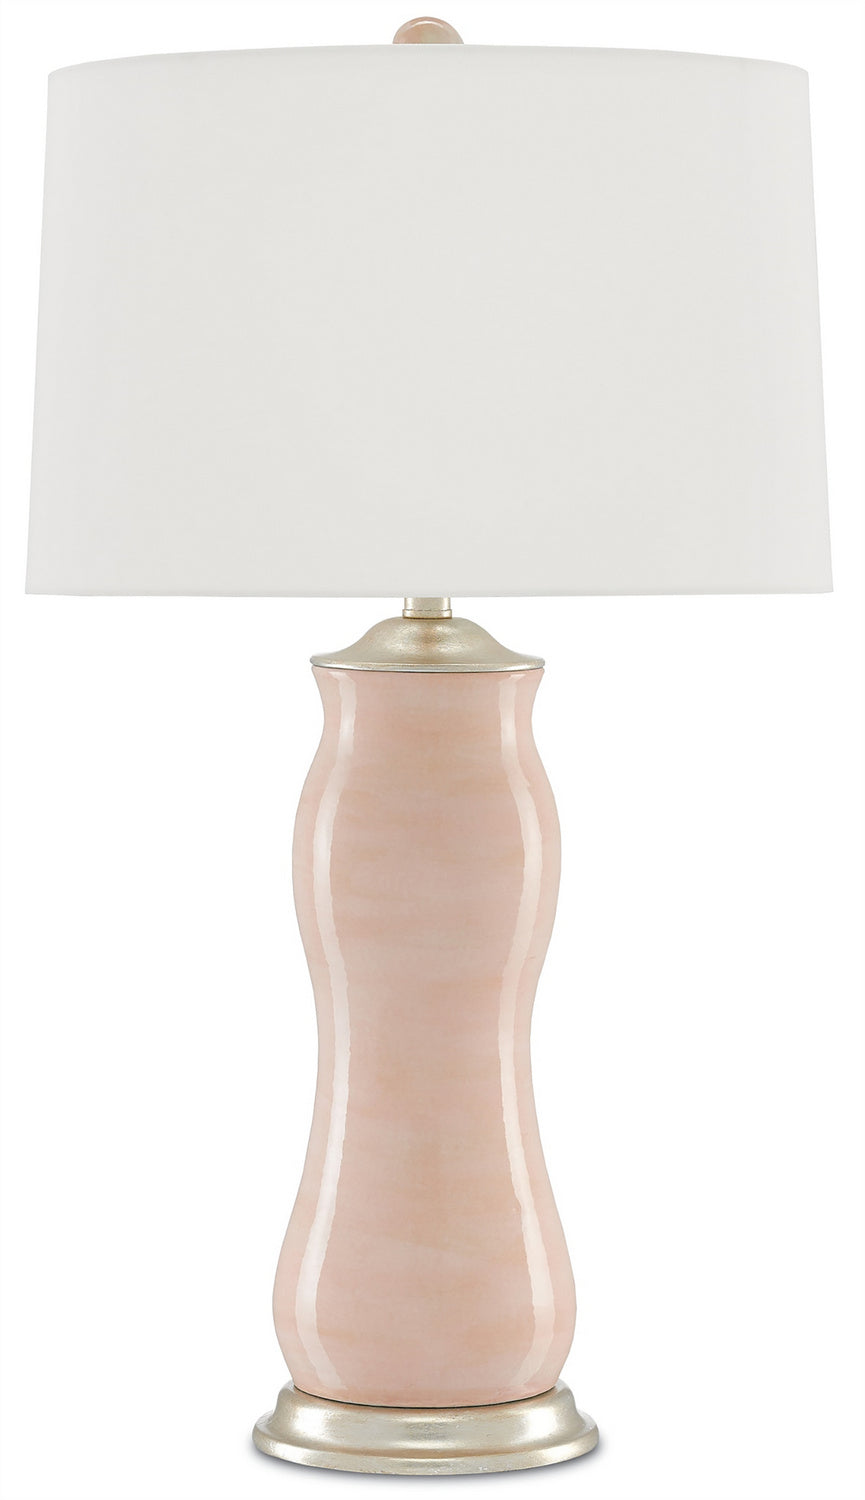 One Light Table Lamp from the Ondine collection in Blush/Silver Leaf finish